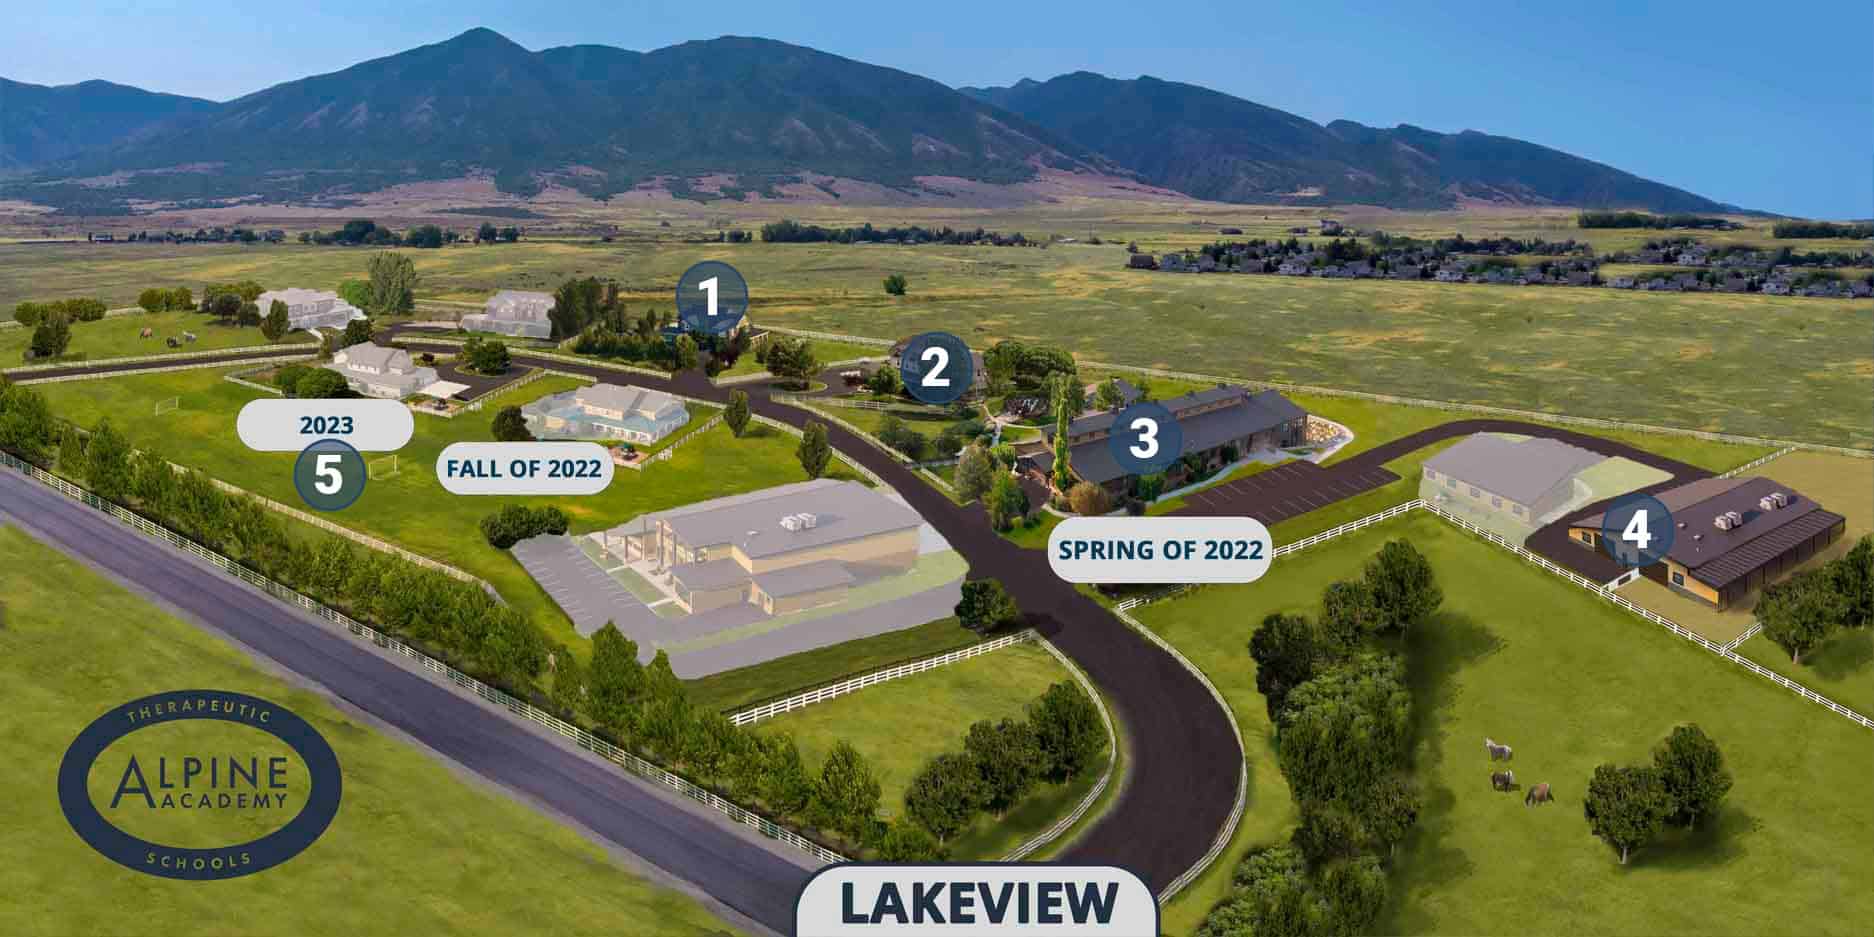 Map of Lakeview Campus